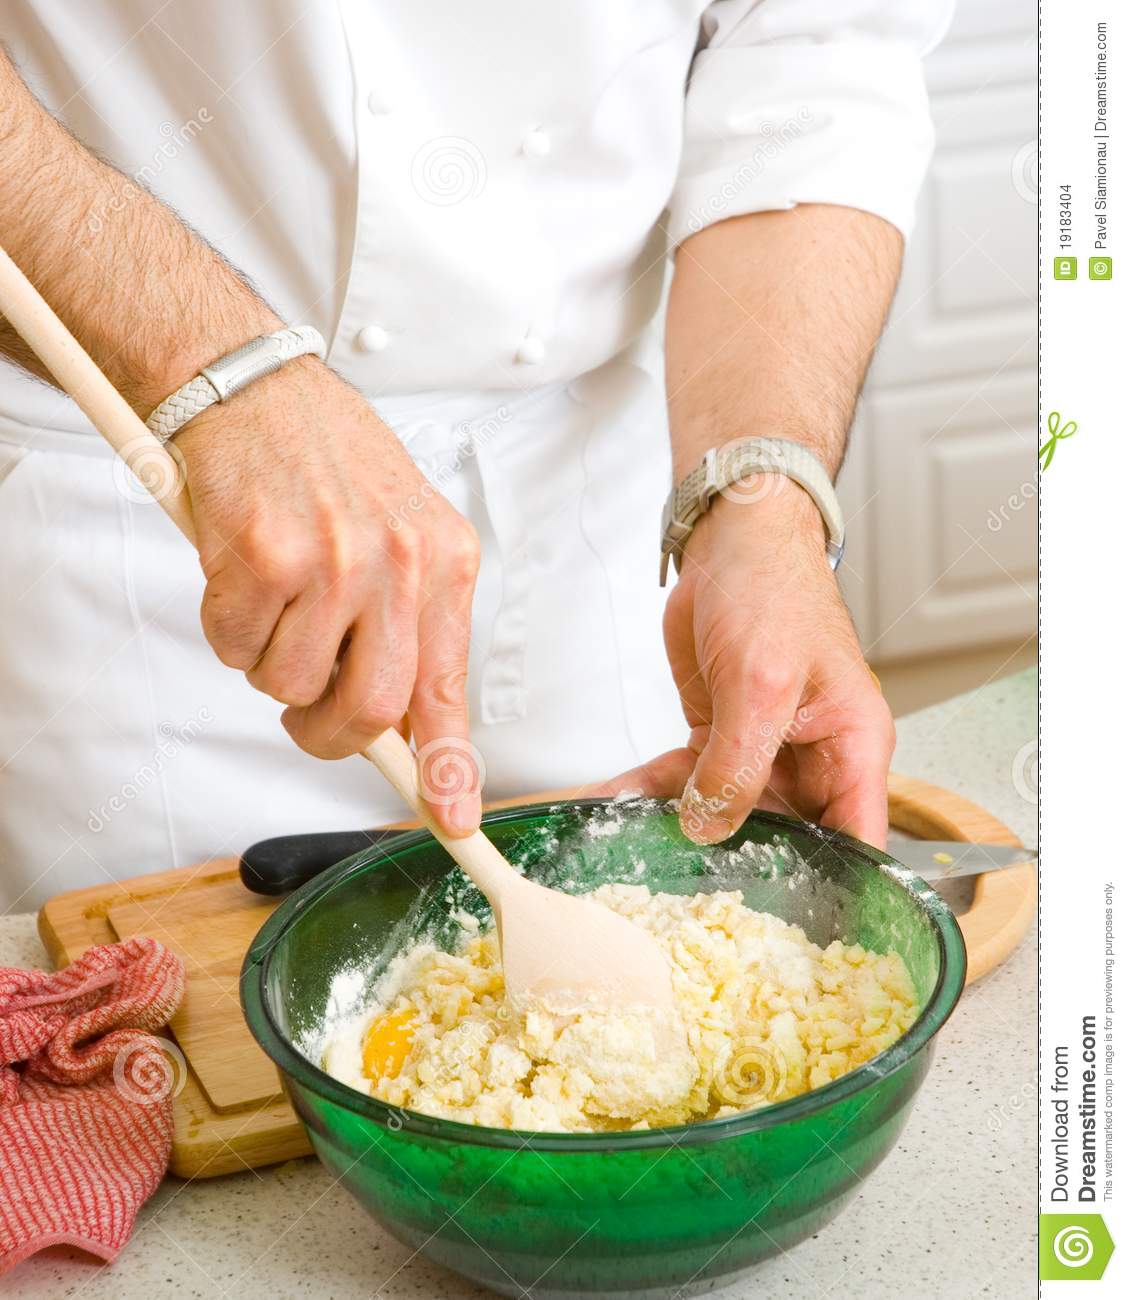 Professional Chef Making Dough Stock Images   Image  19183404